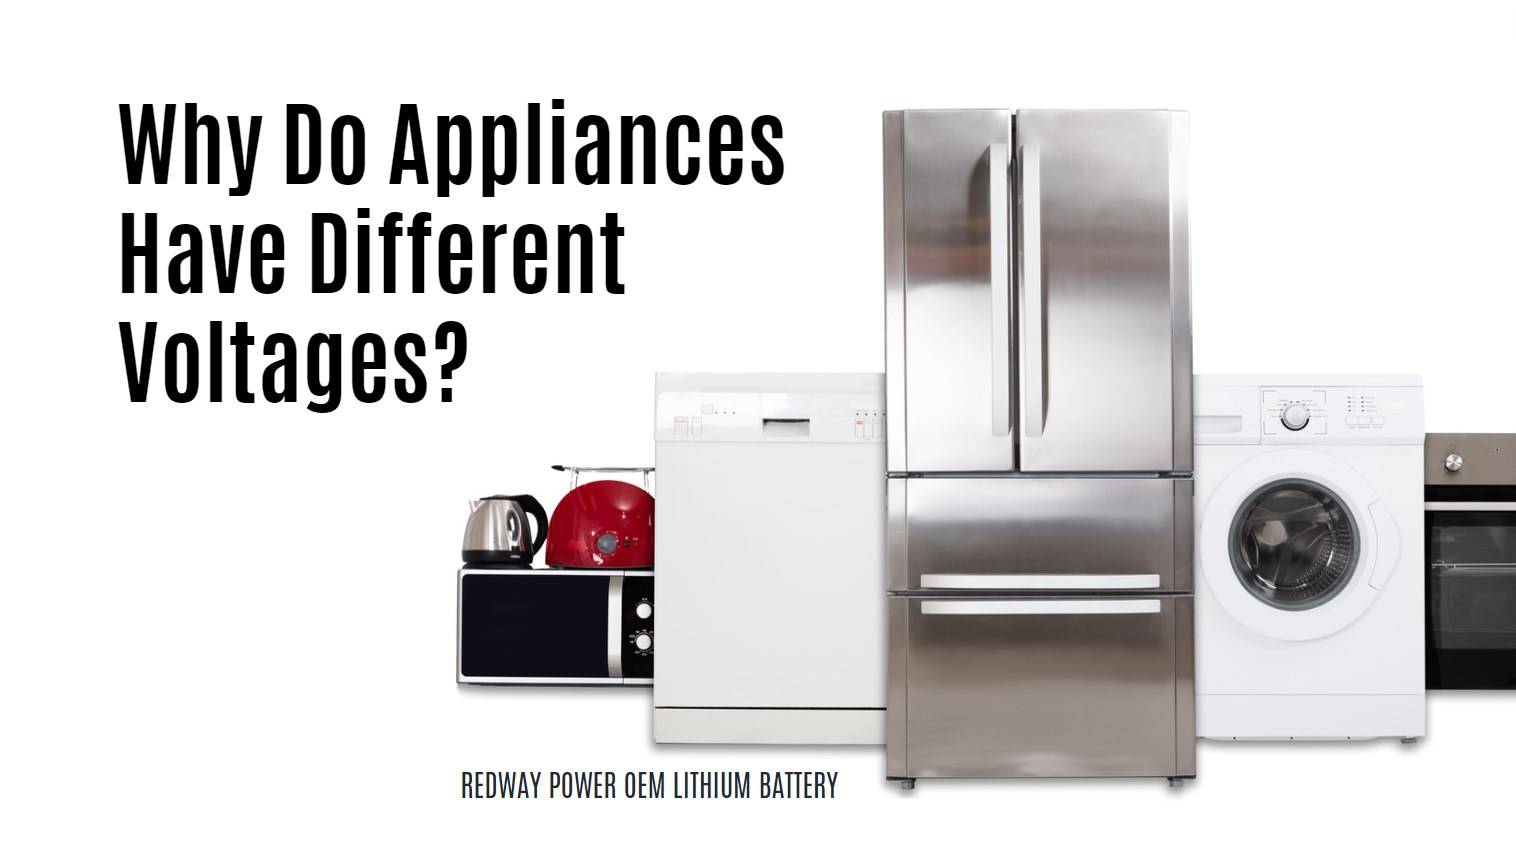 Why Do Appliances Have Different Voltages?